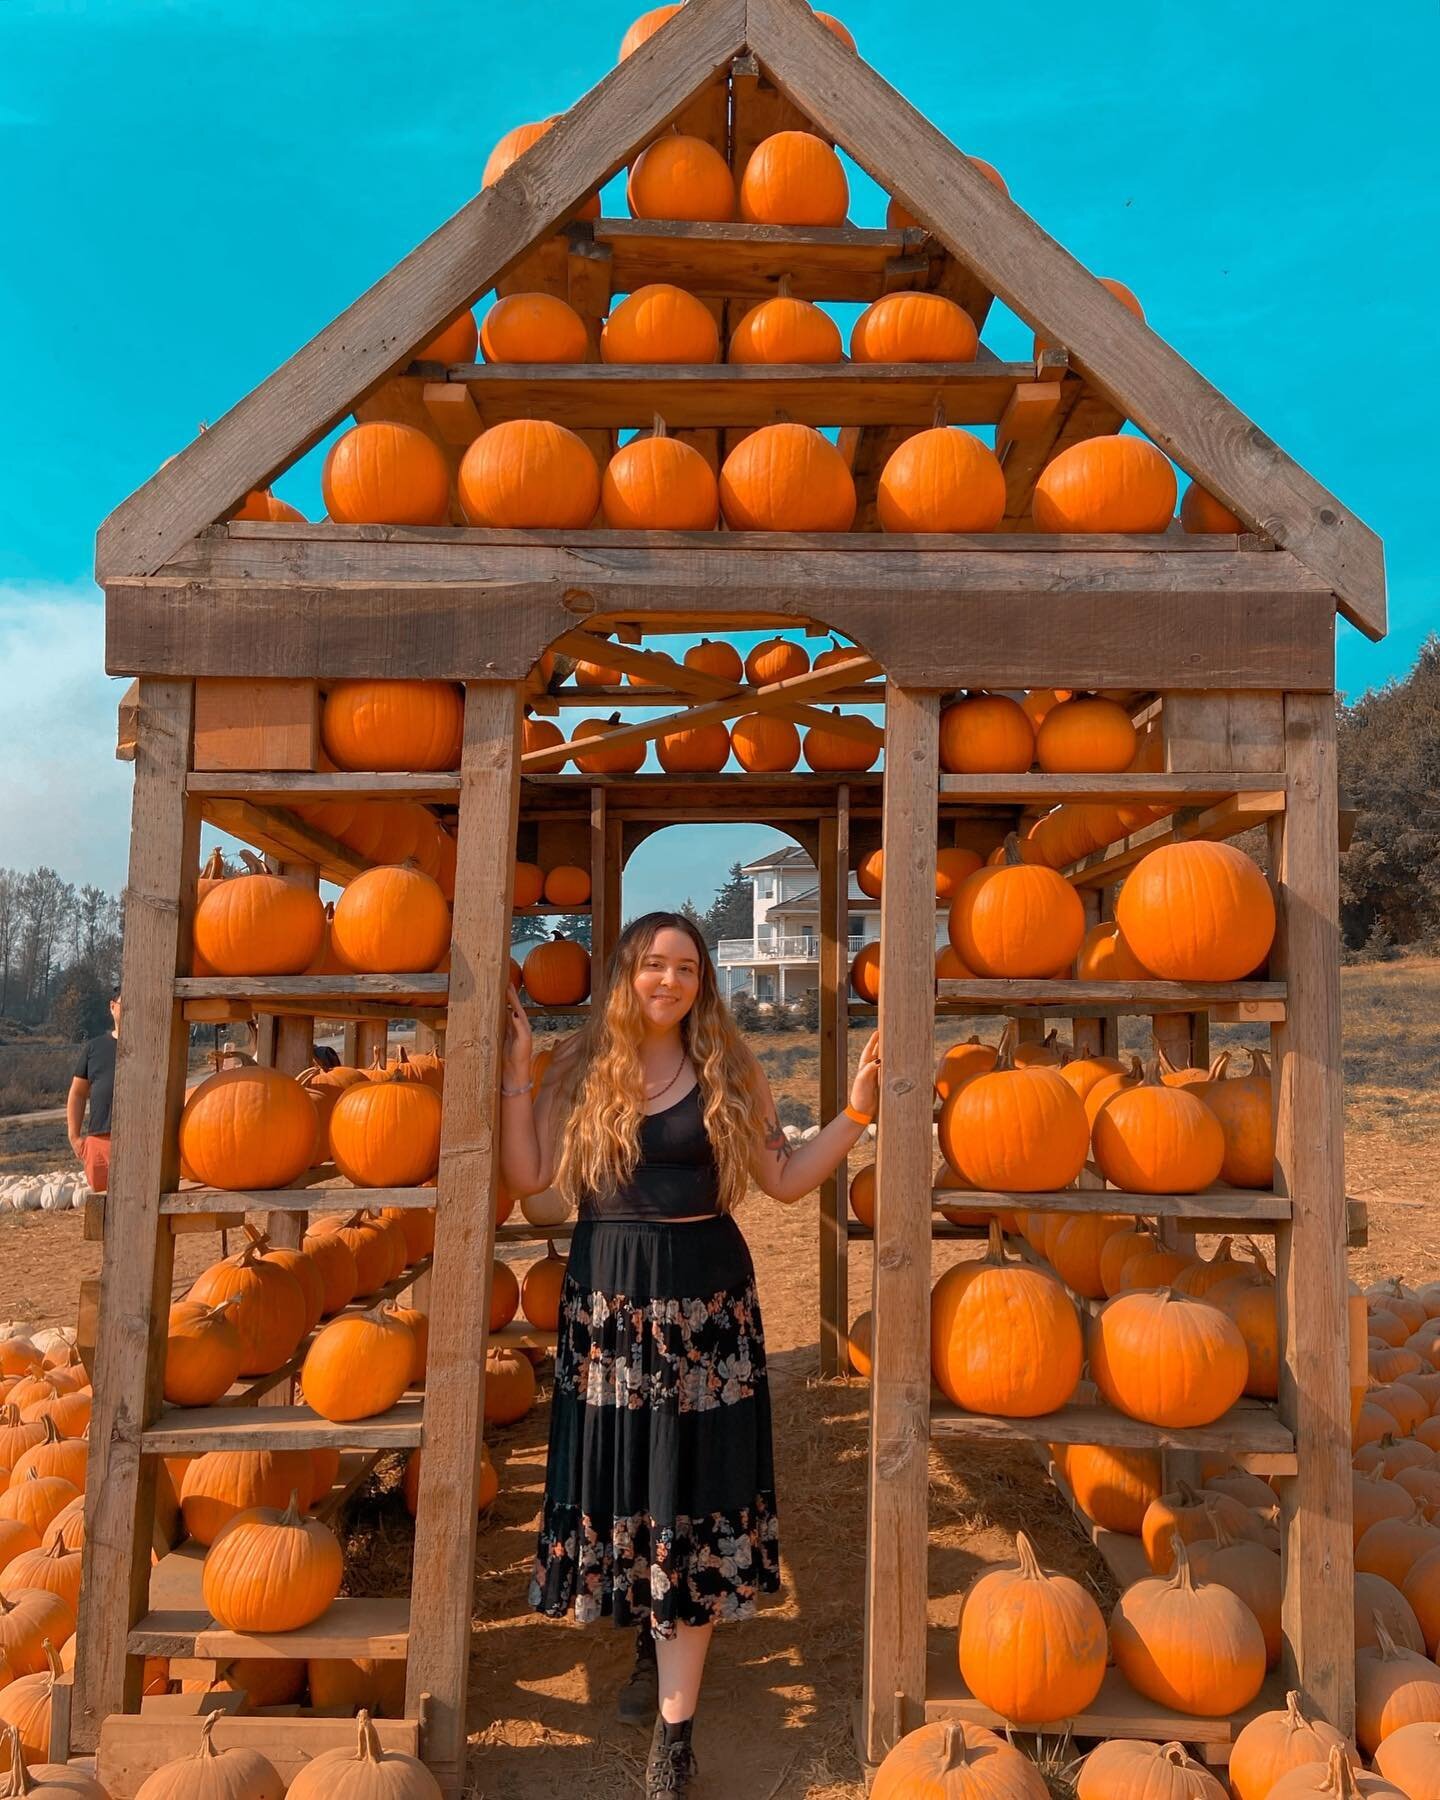 There once was a witch whole lived in a house made of pumpkins ❤️